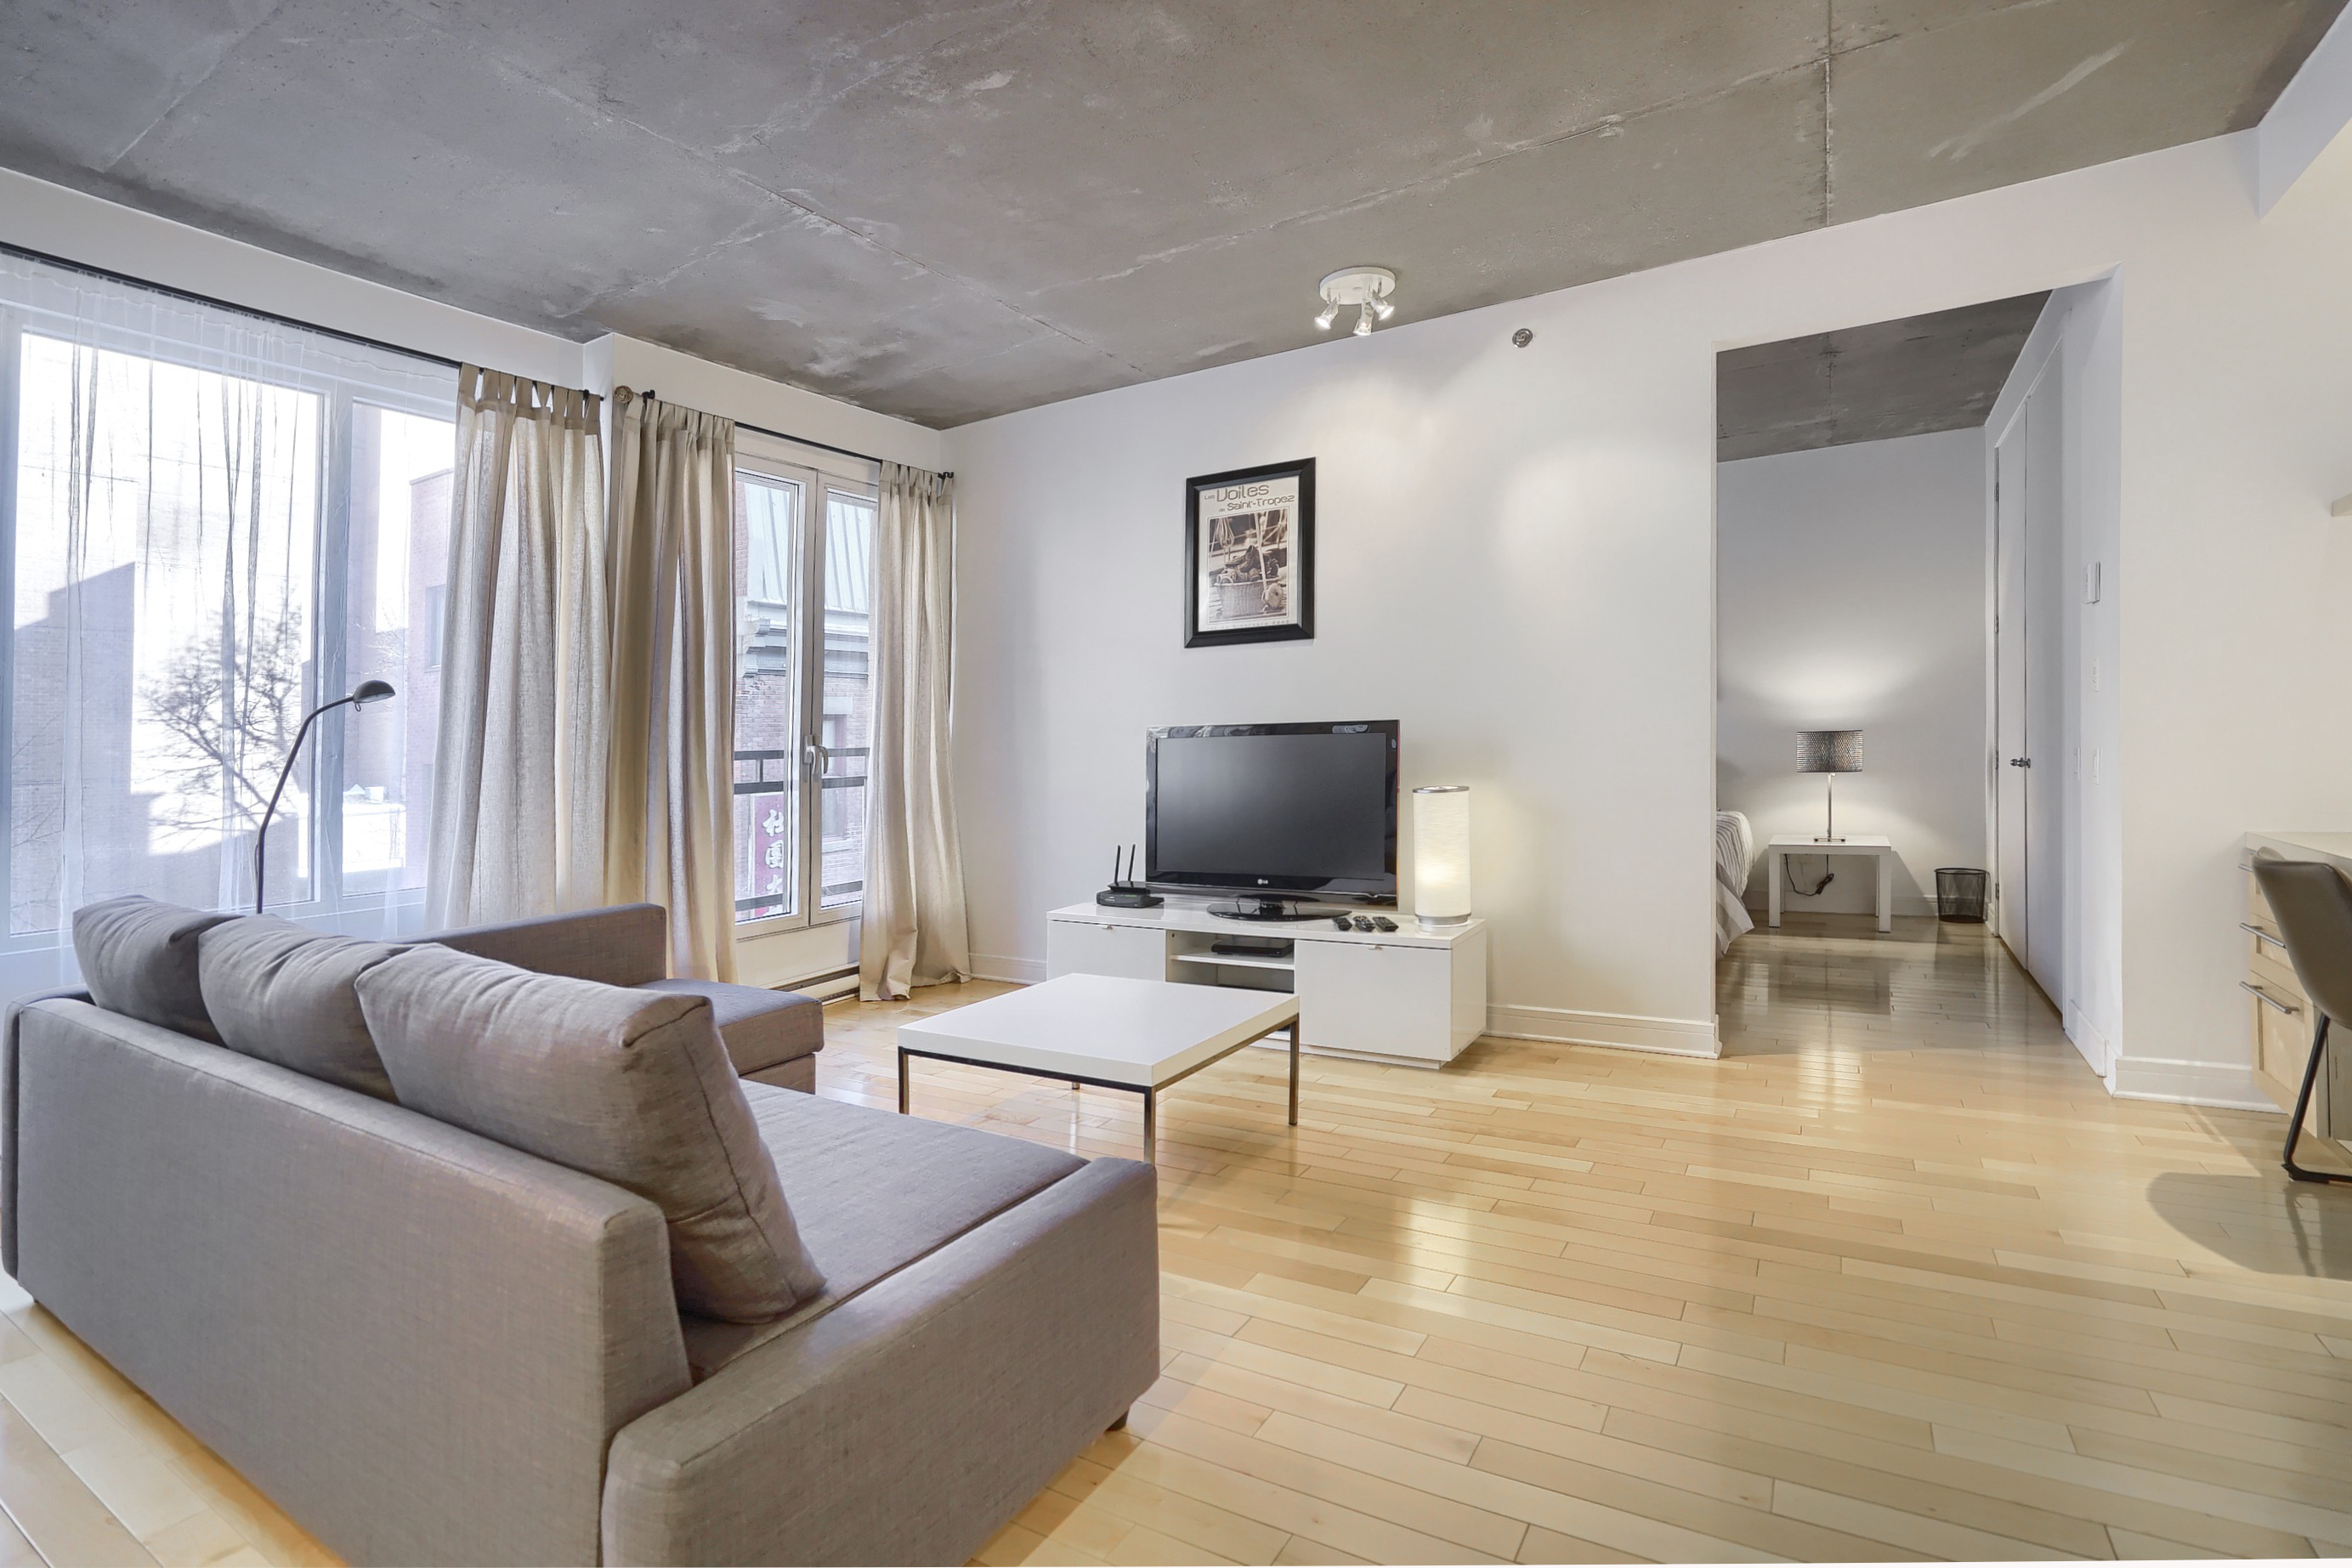 Here is a spectacular and very spacious, fully equipped living room with large, bright and sunny windows in our corporate housing in Montreal.